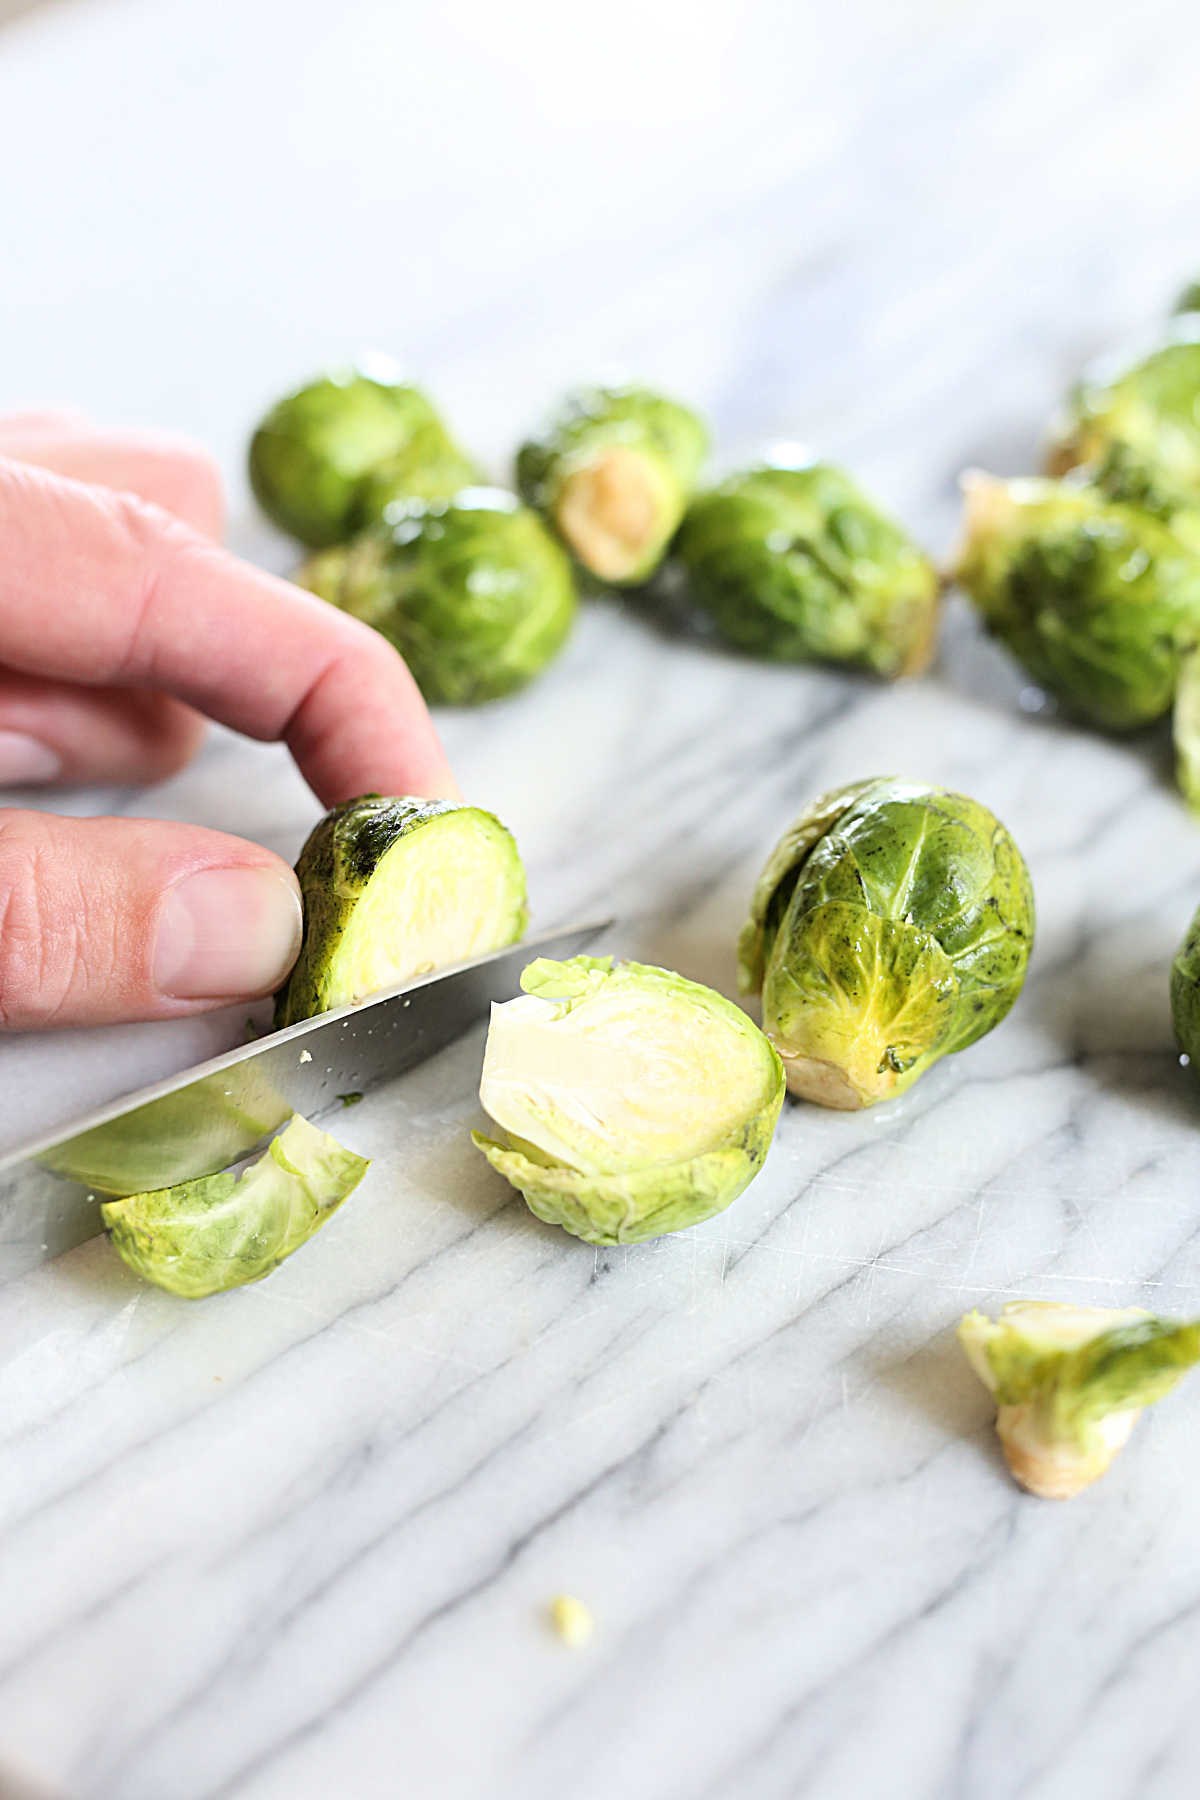 hand holding knife showing how to cut in half brussels sprouts